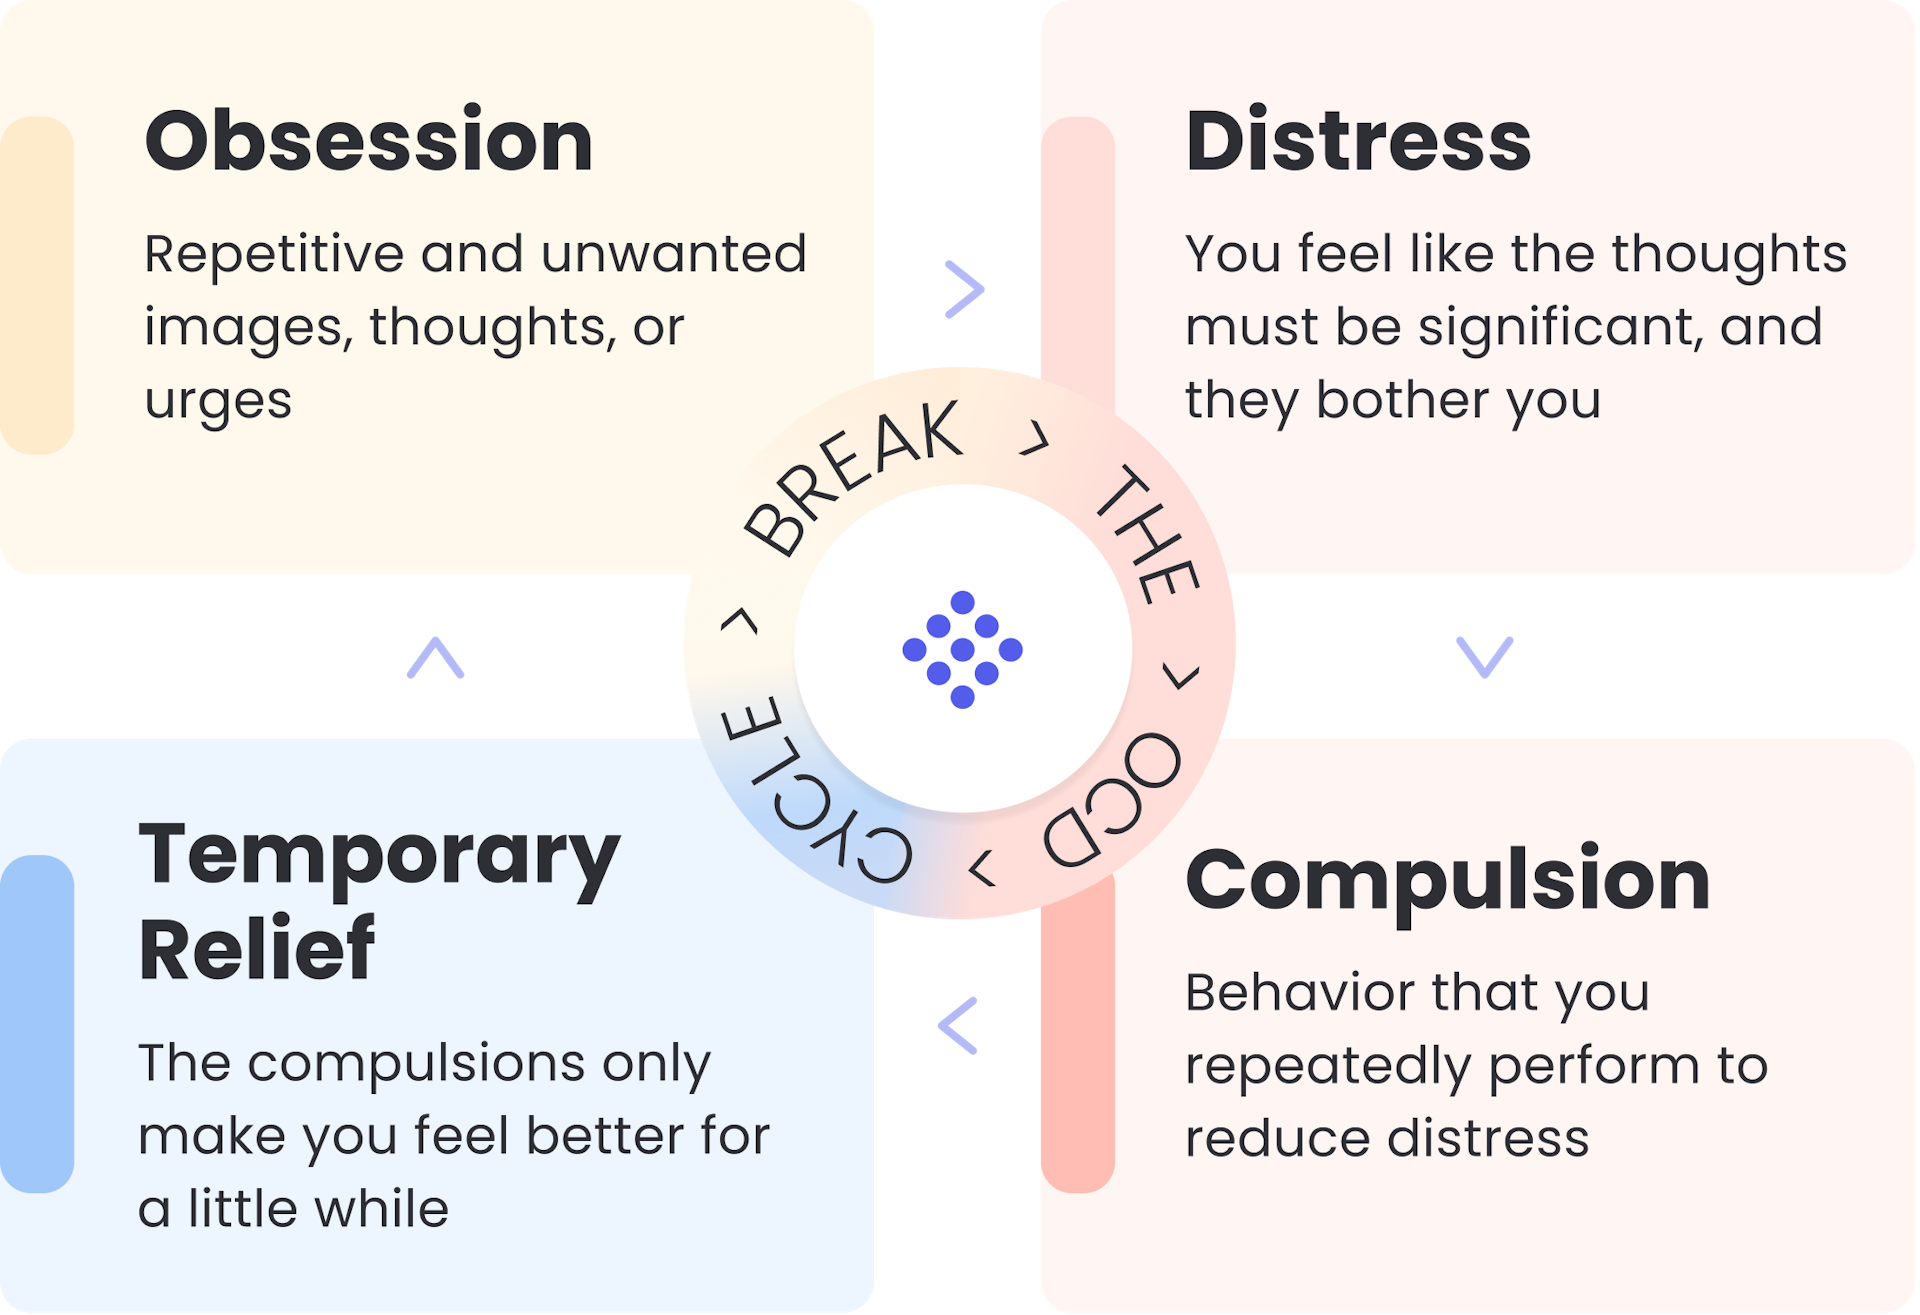 Break the OCD cycle of obsession, distress, compulsion, and temporary relief.